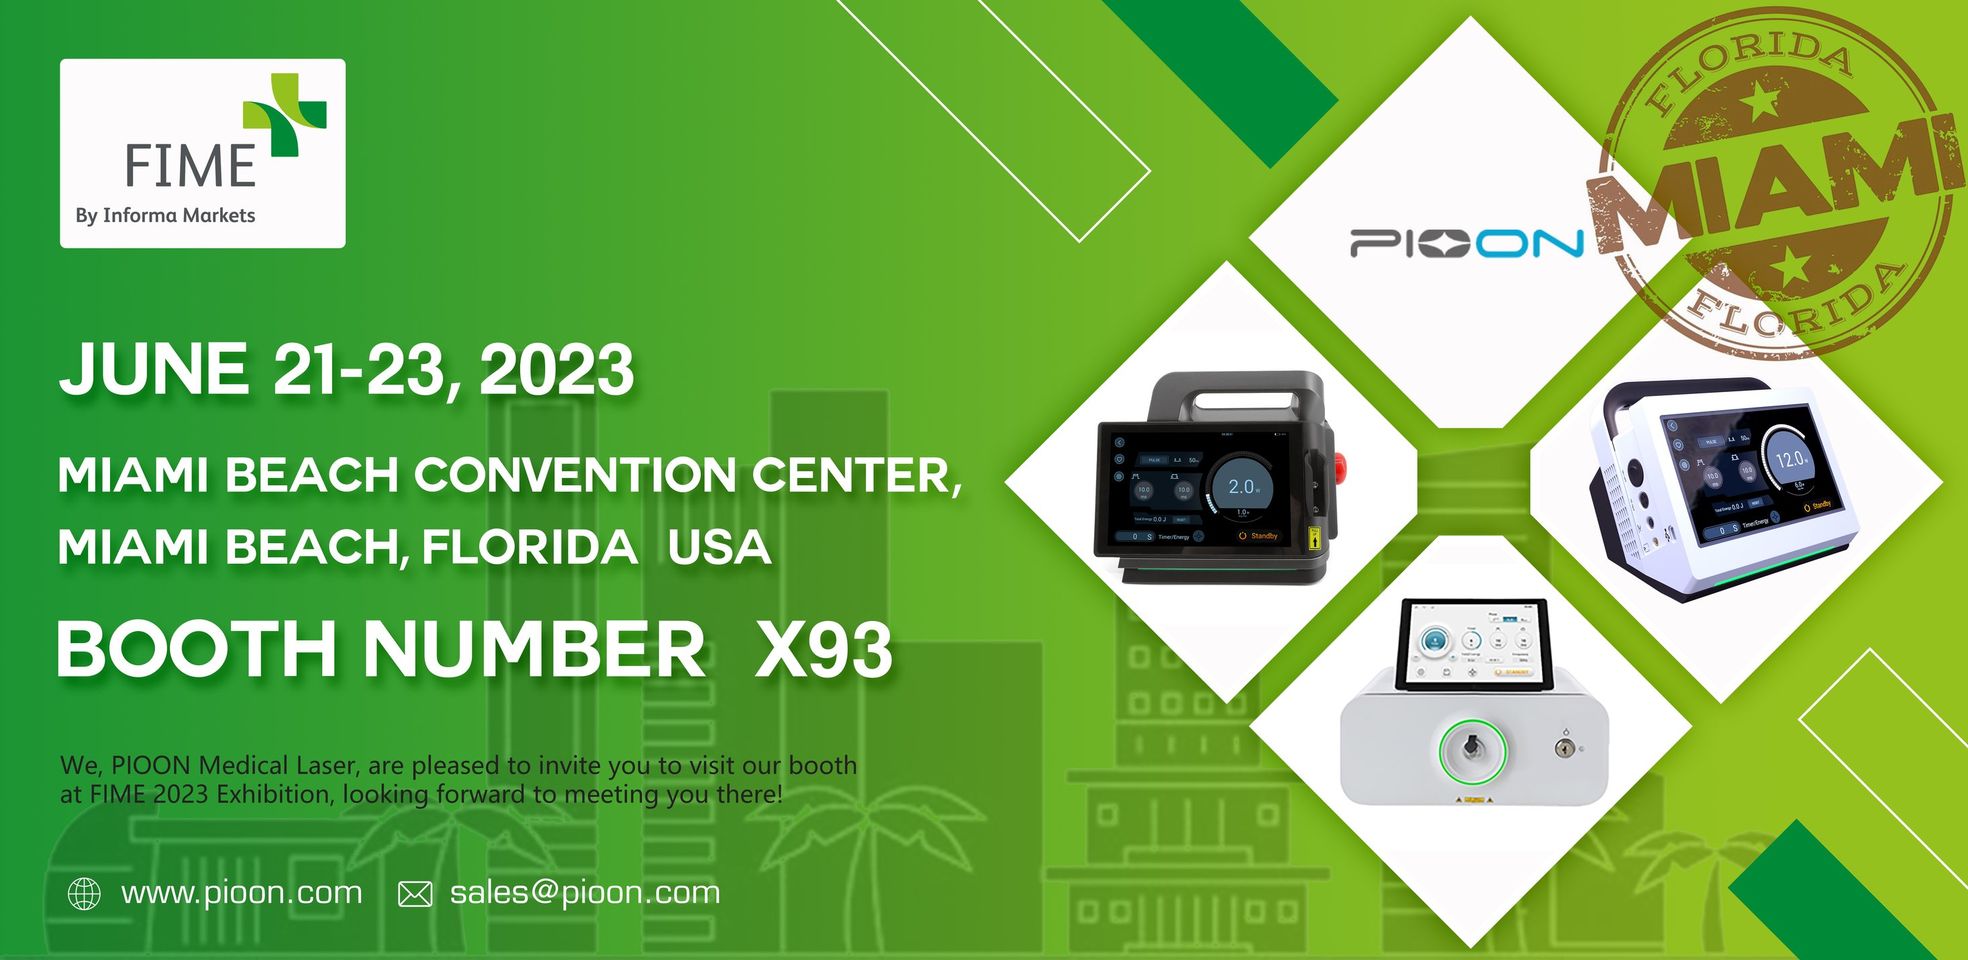 FIME 2023-PIOON MEDICAL LASER will see you in Miami next month.